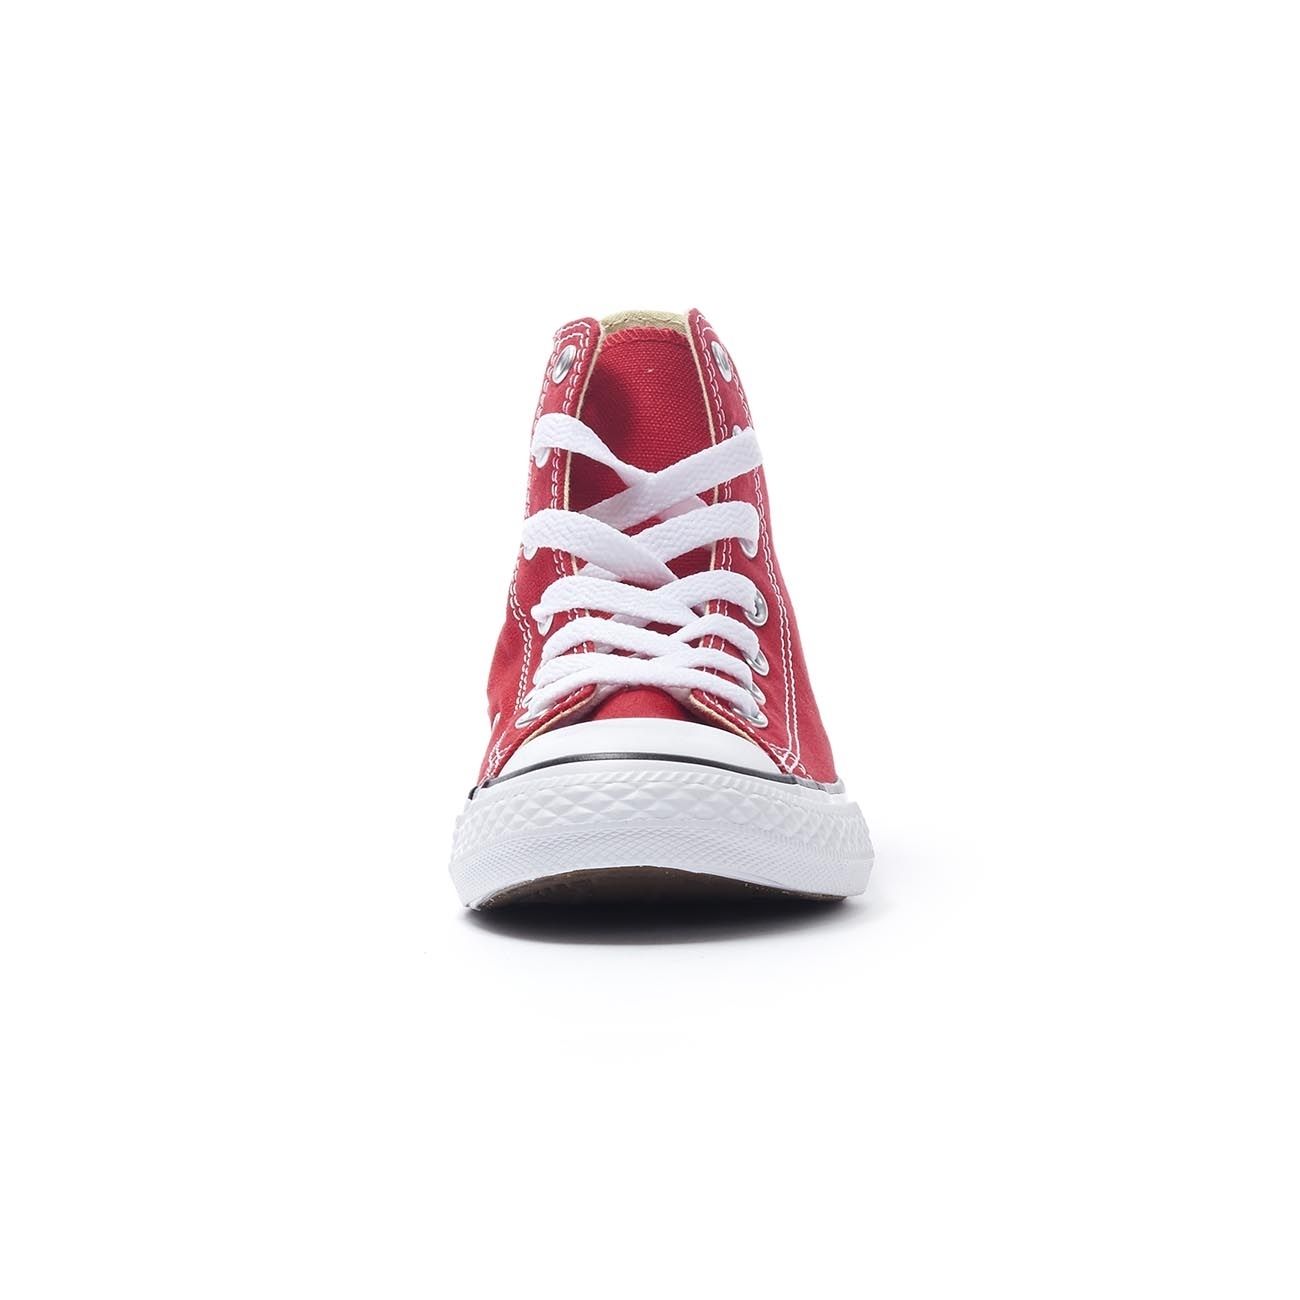 adidas shoes high tops red for girls